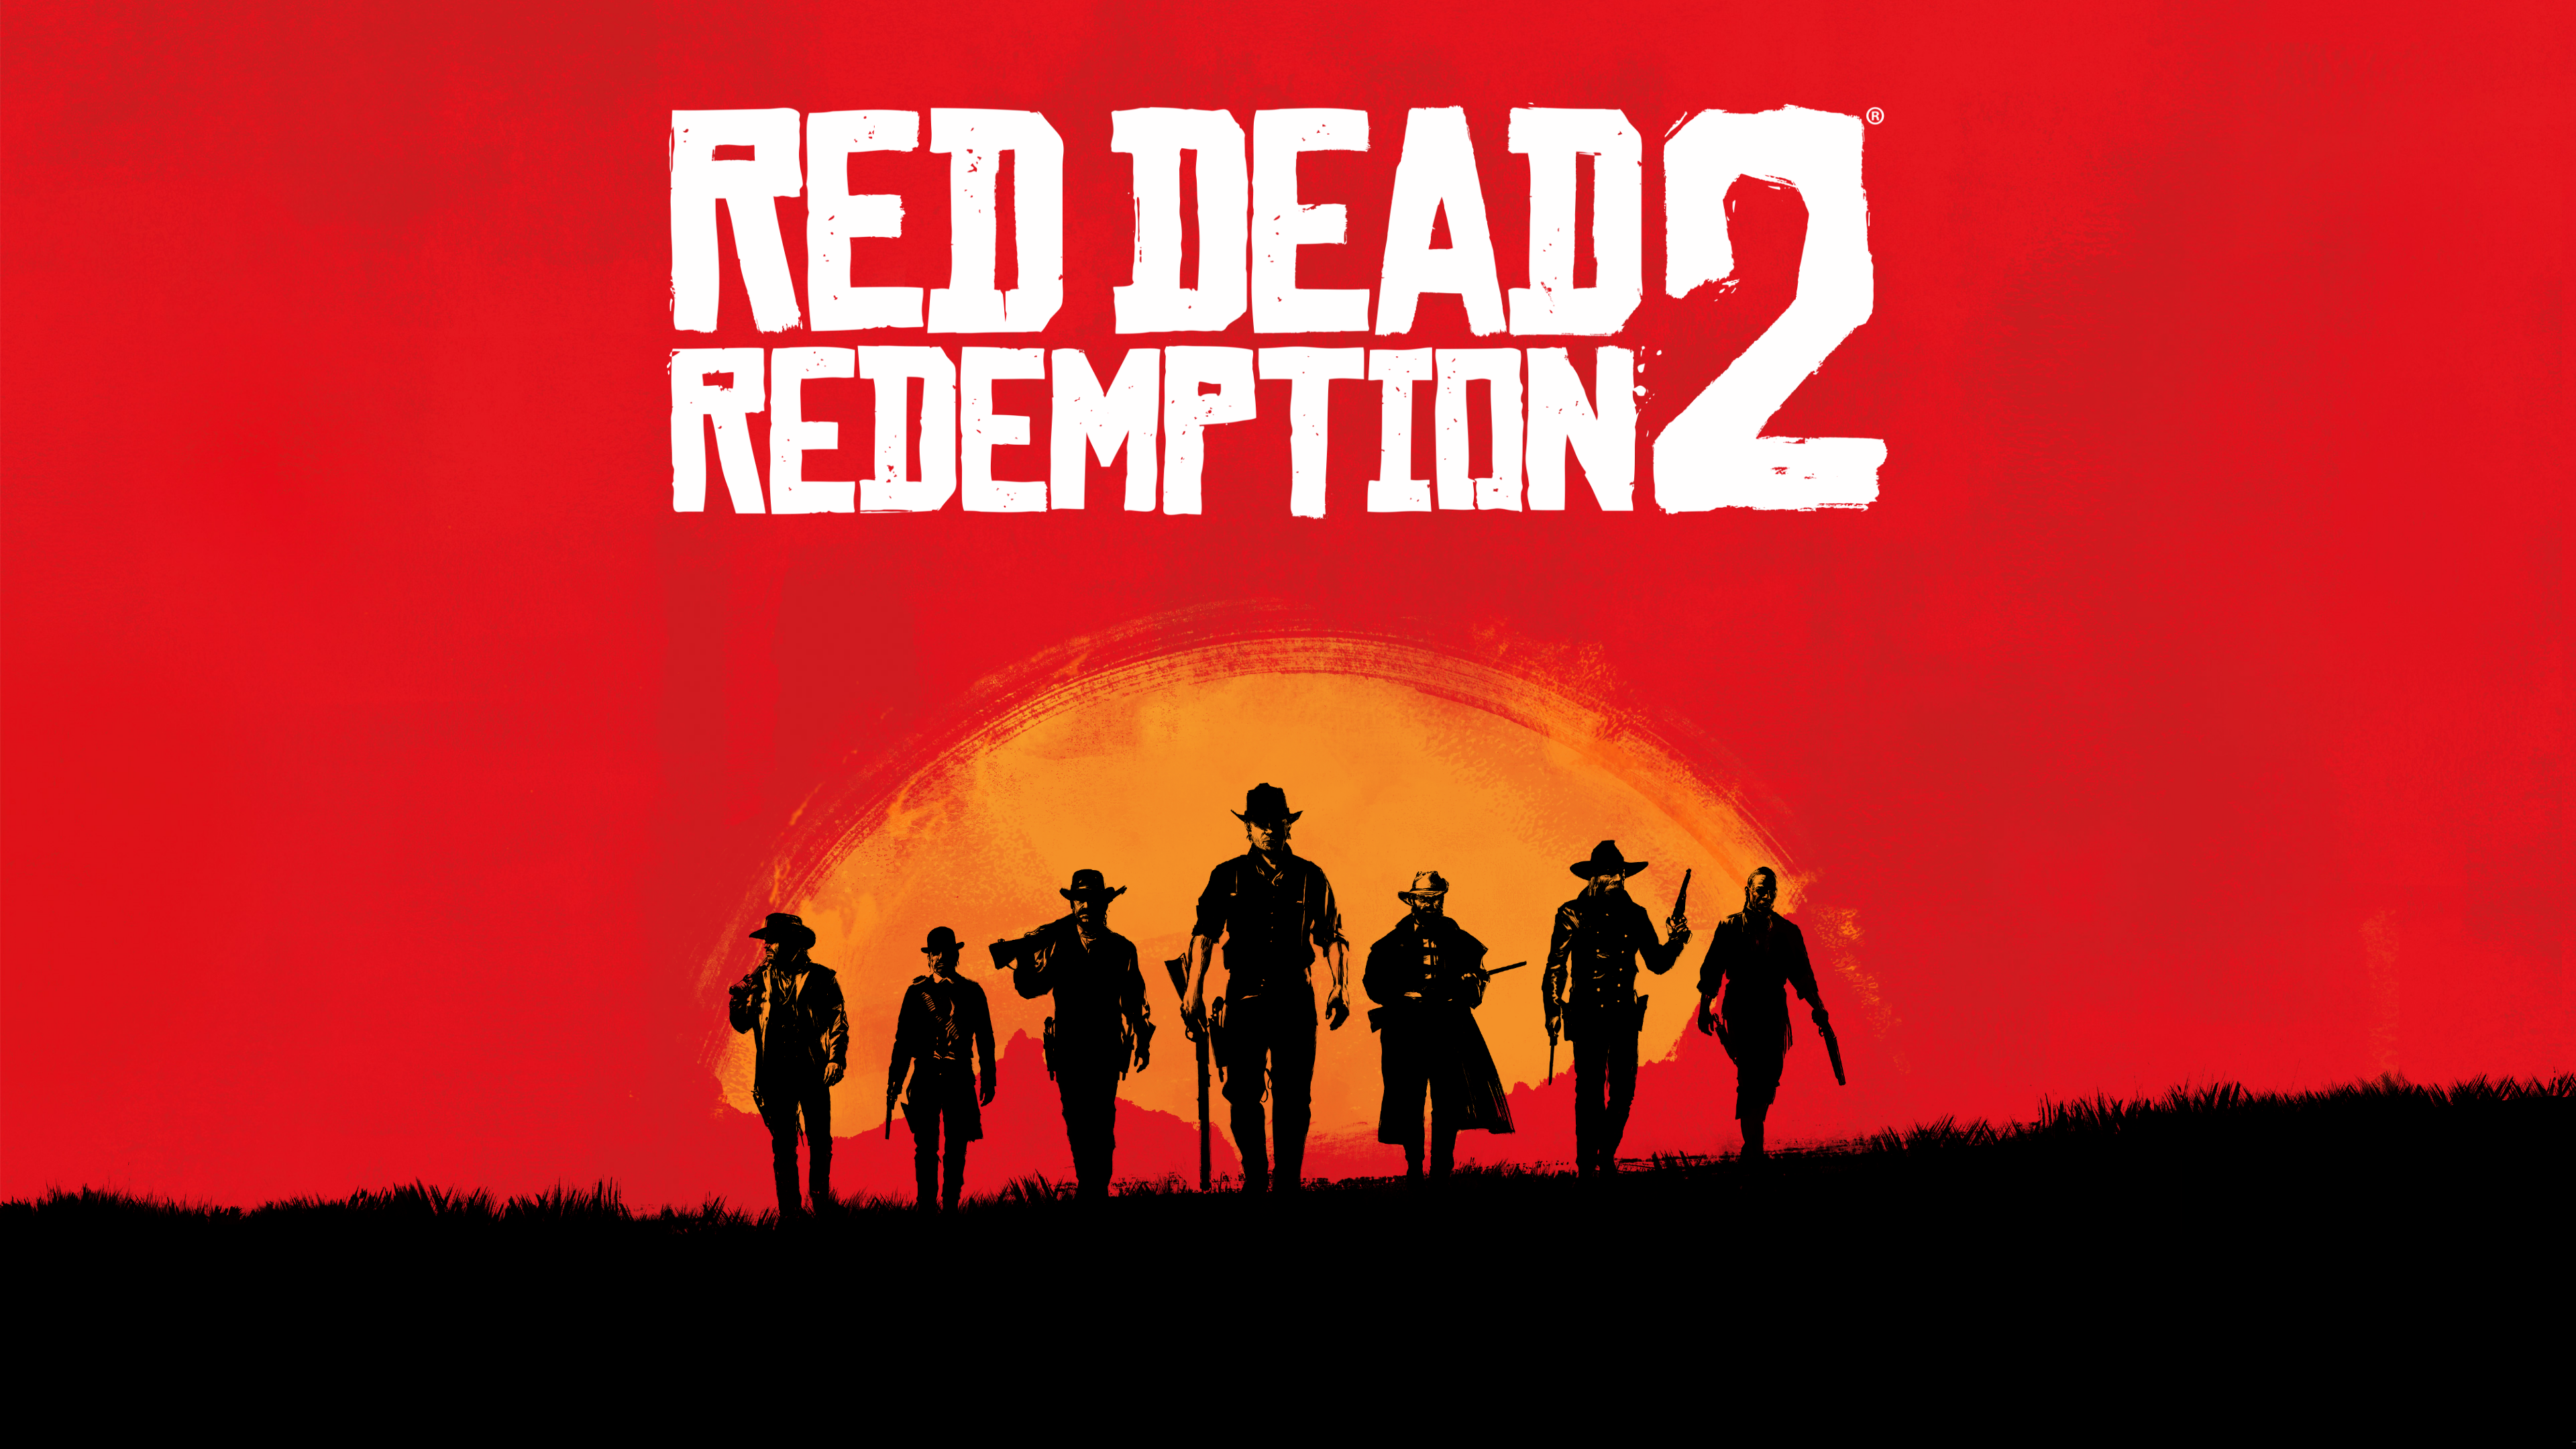 Read Dead Redemption 4k Wallpaper High Quality Not Upscaled